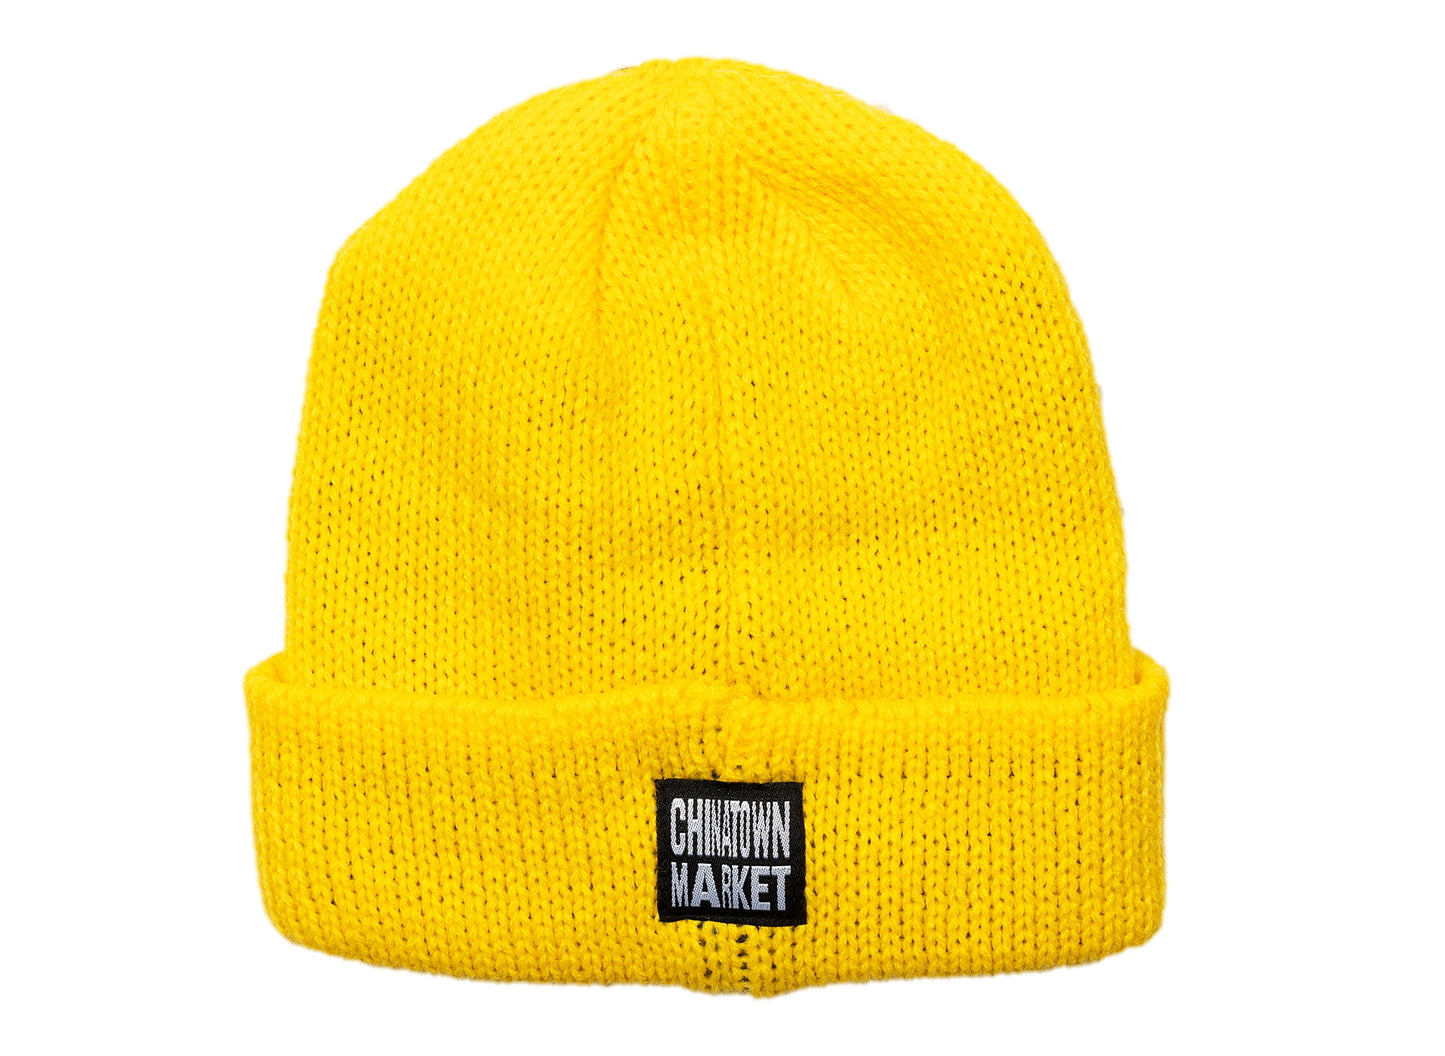 Chinatown Market Smiley Knitted Yellow Beanie